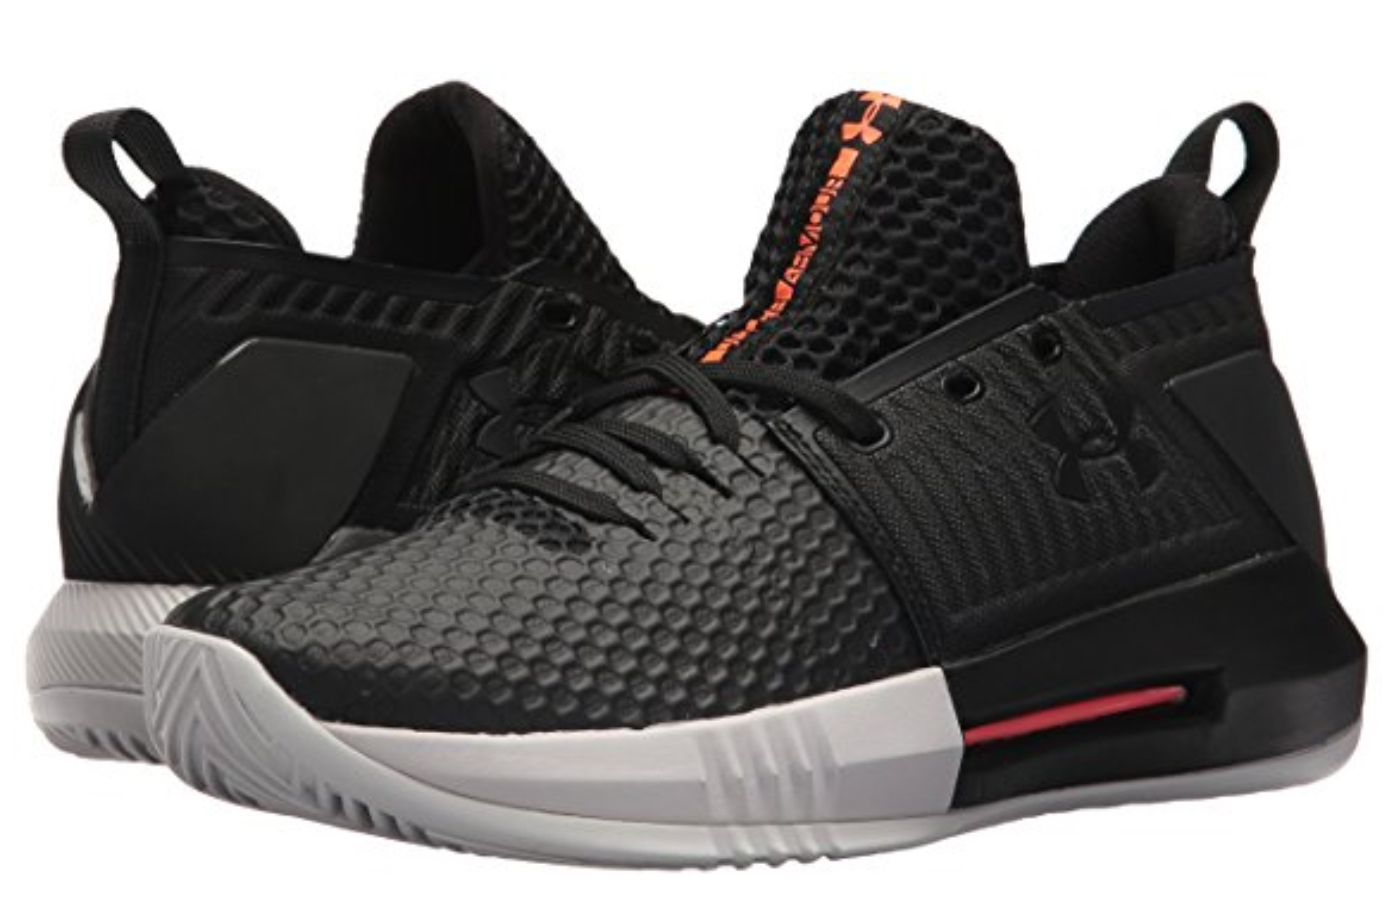 The Under Armour Drive 4 Low is 